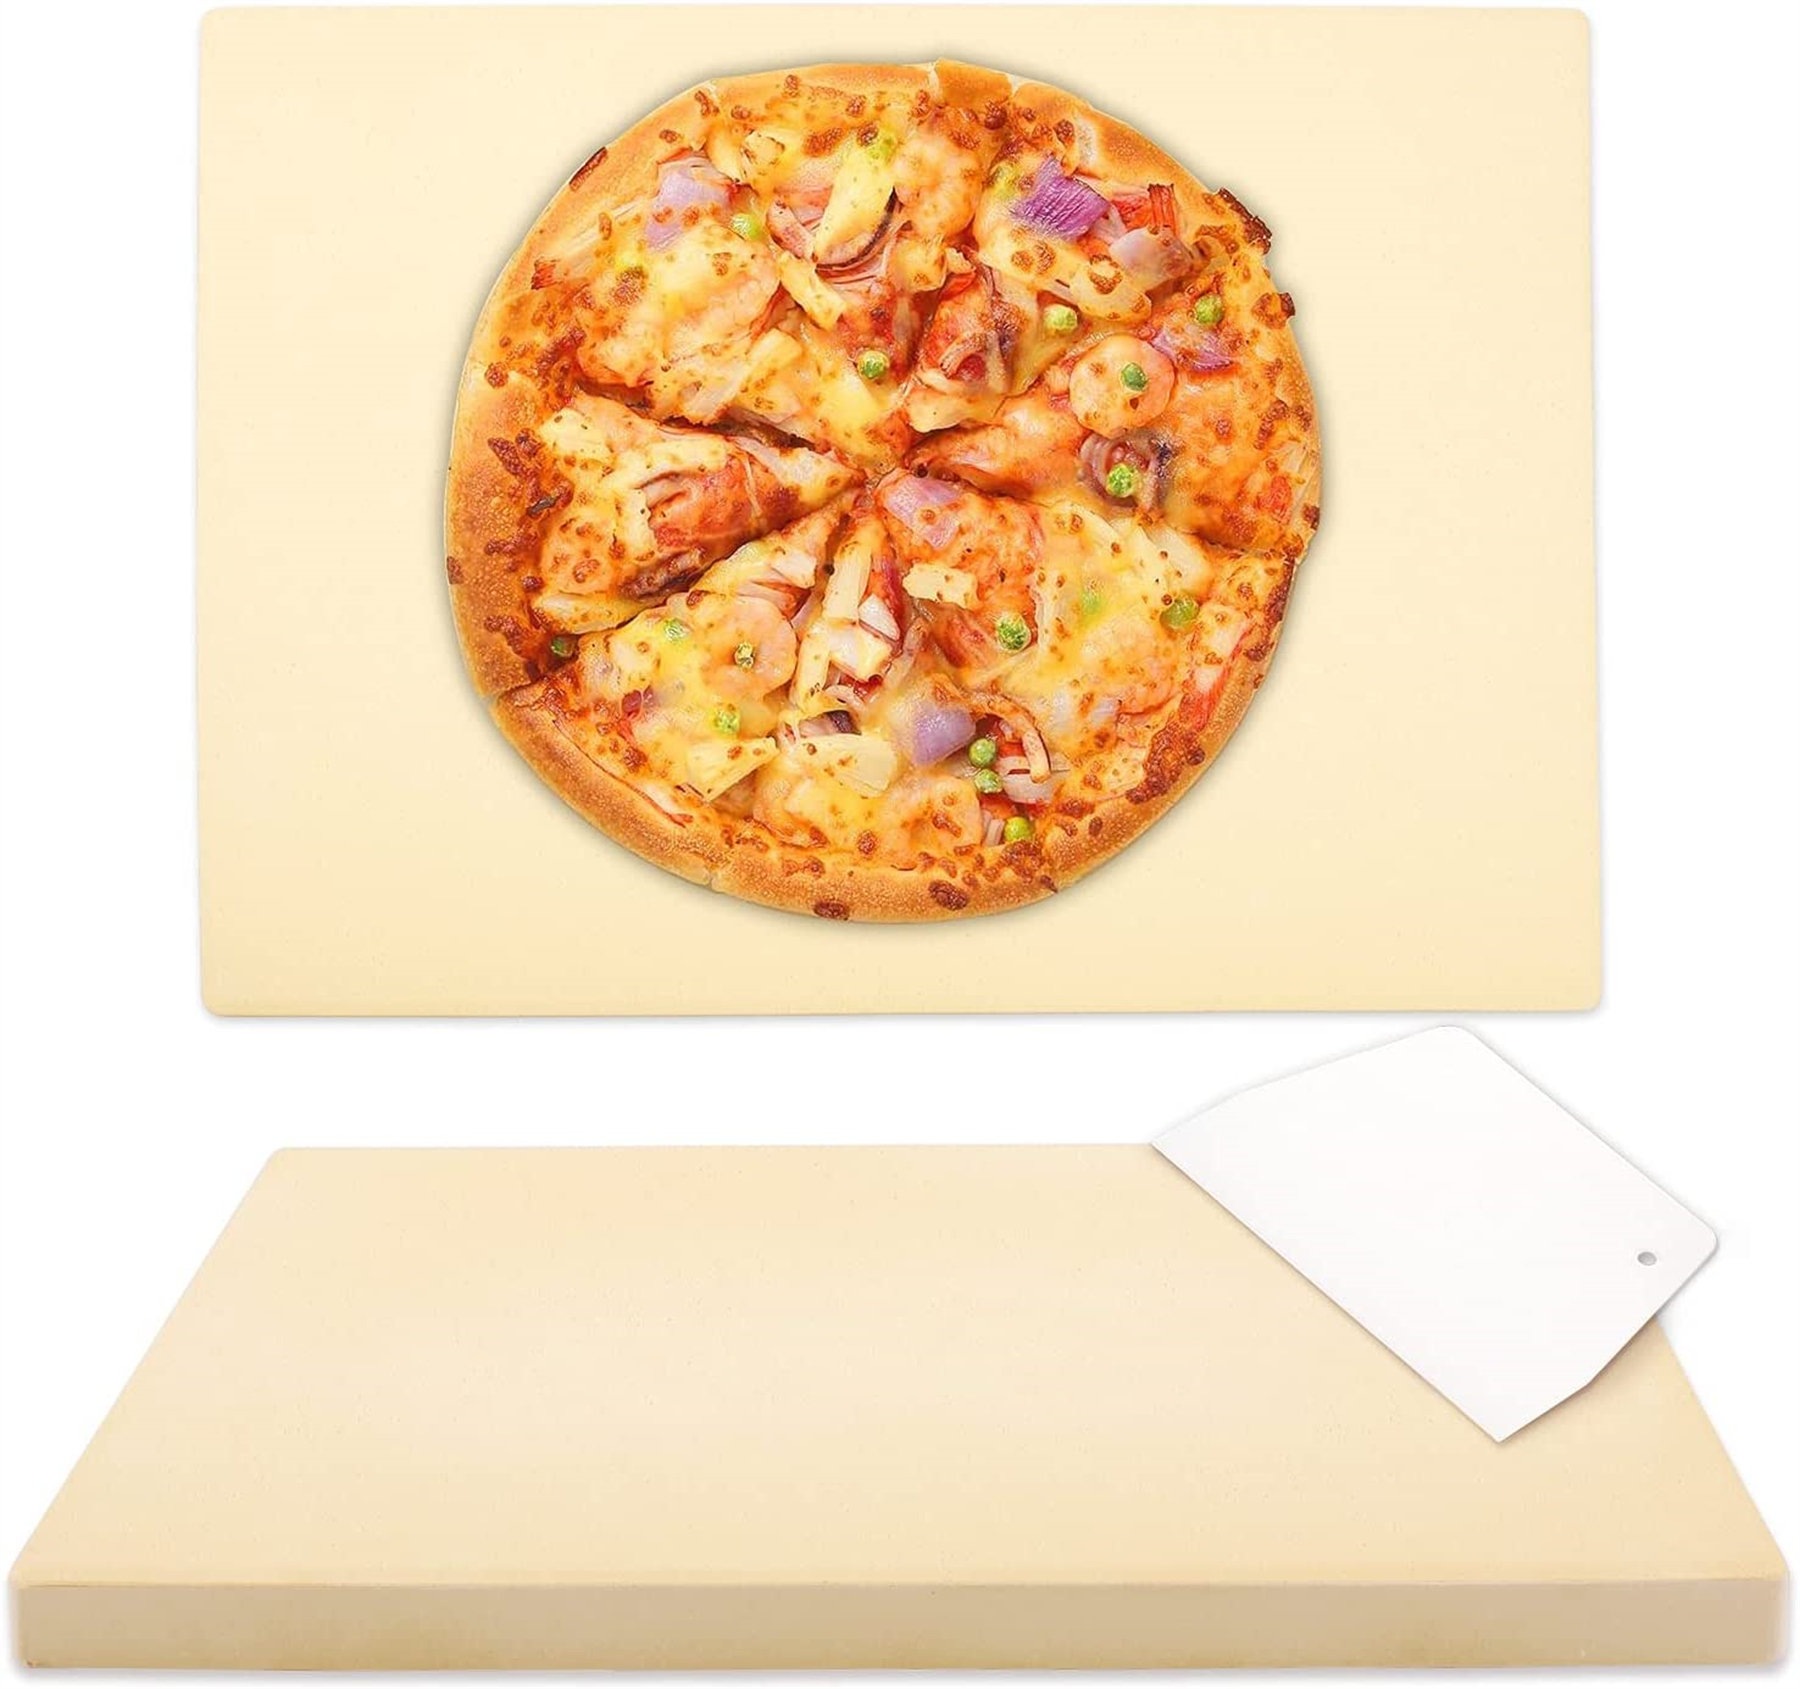 Pizza Stone for Grilling 12"x15" Rectangular Baking Stone for Oven/Grill Durable 